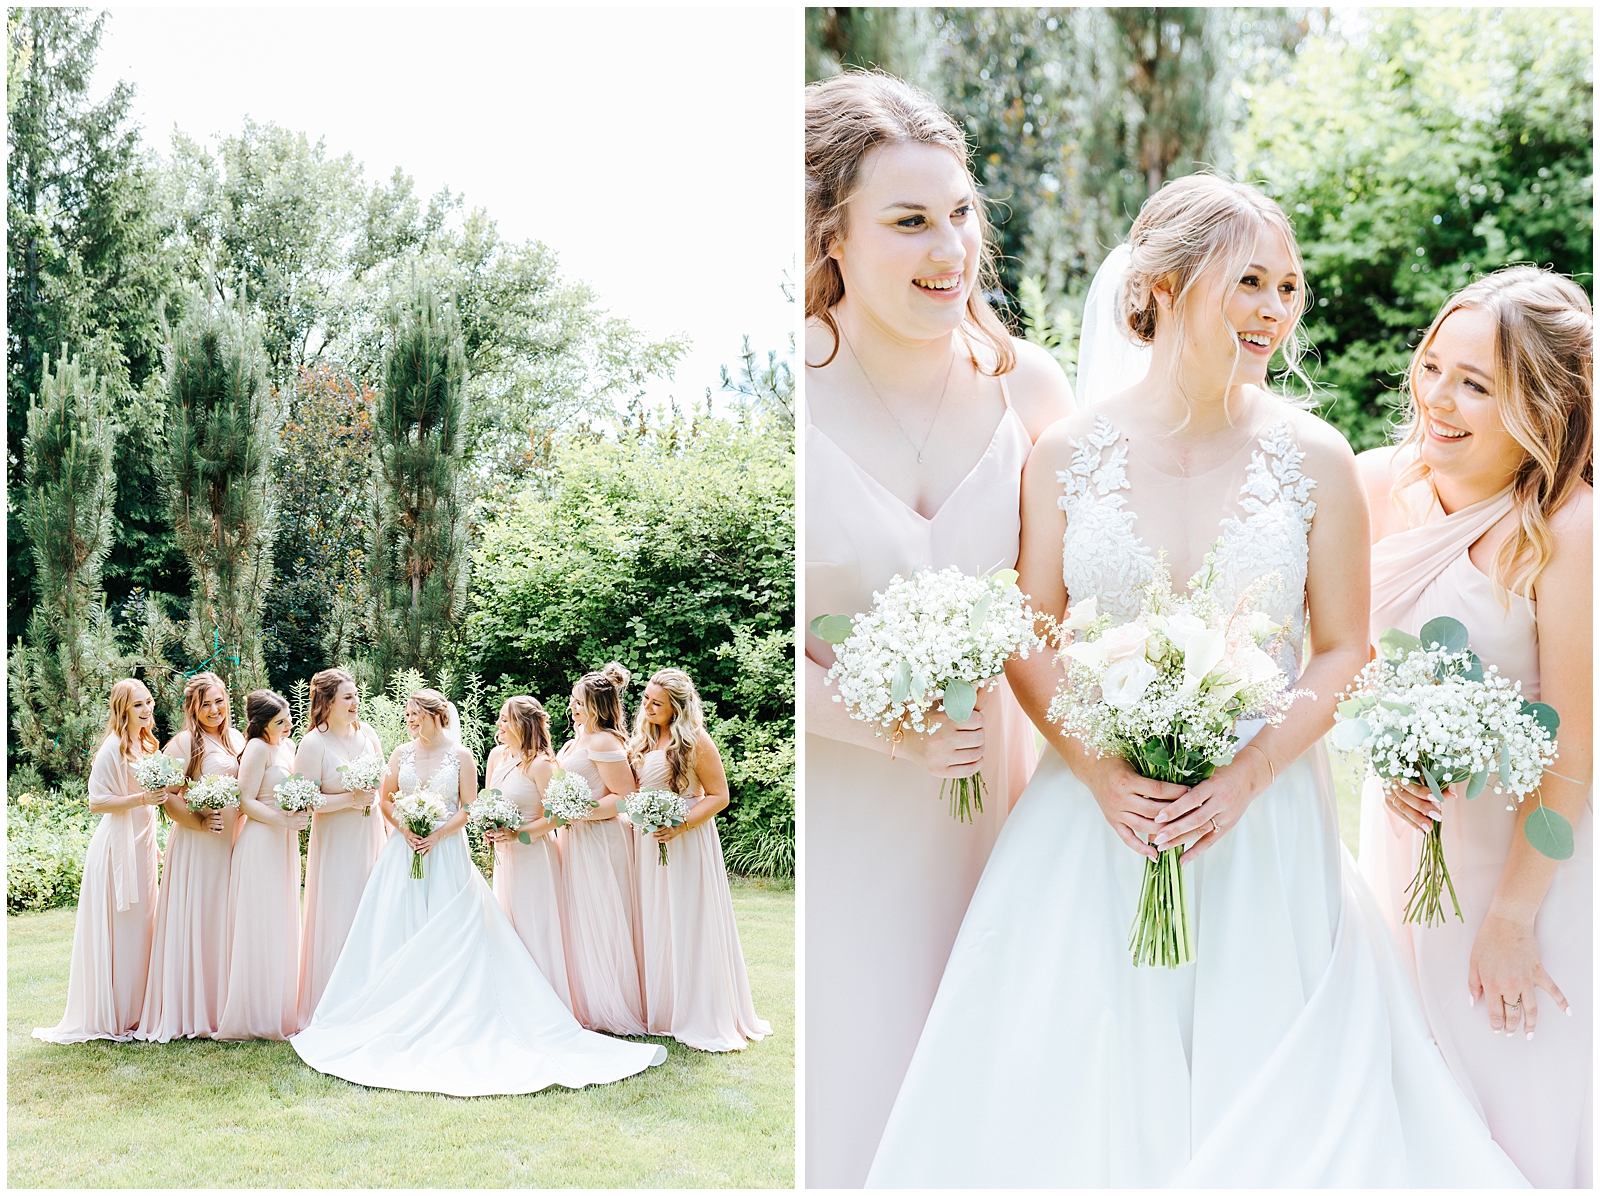 Bridesmaids in Blush dresses with Baby's Breath Bouquets